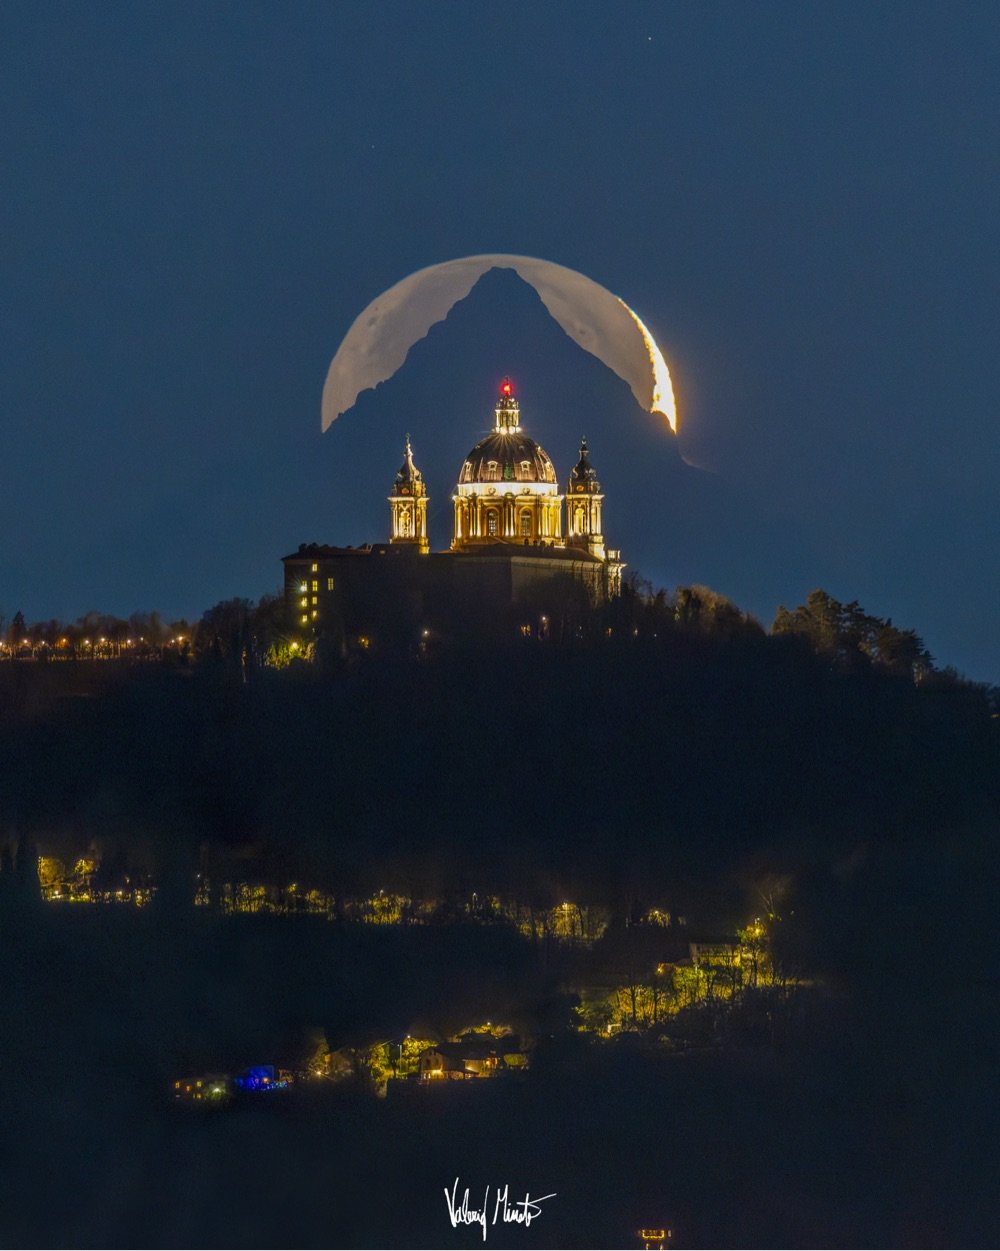 the Moon rising over a cathedral and a mountain, all three lined up perfectly